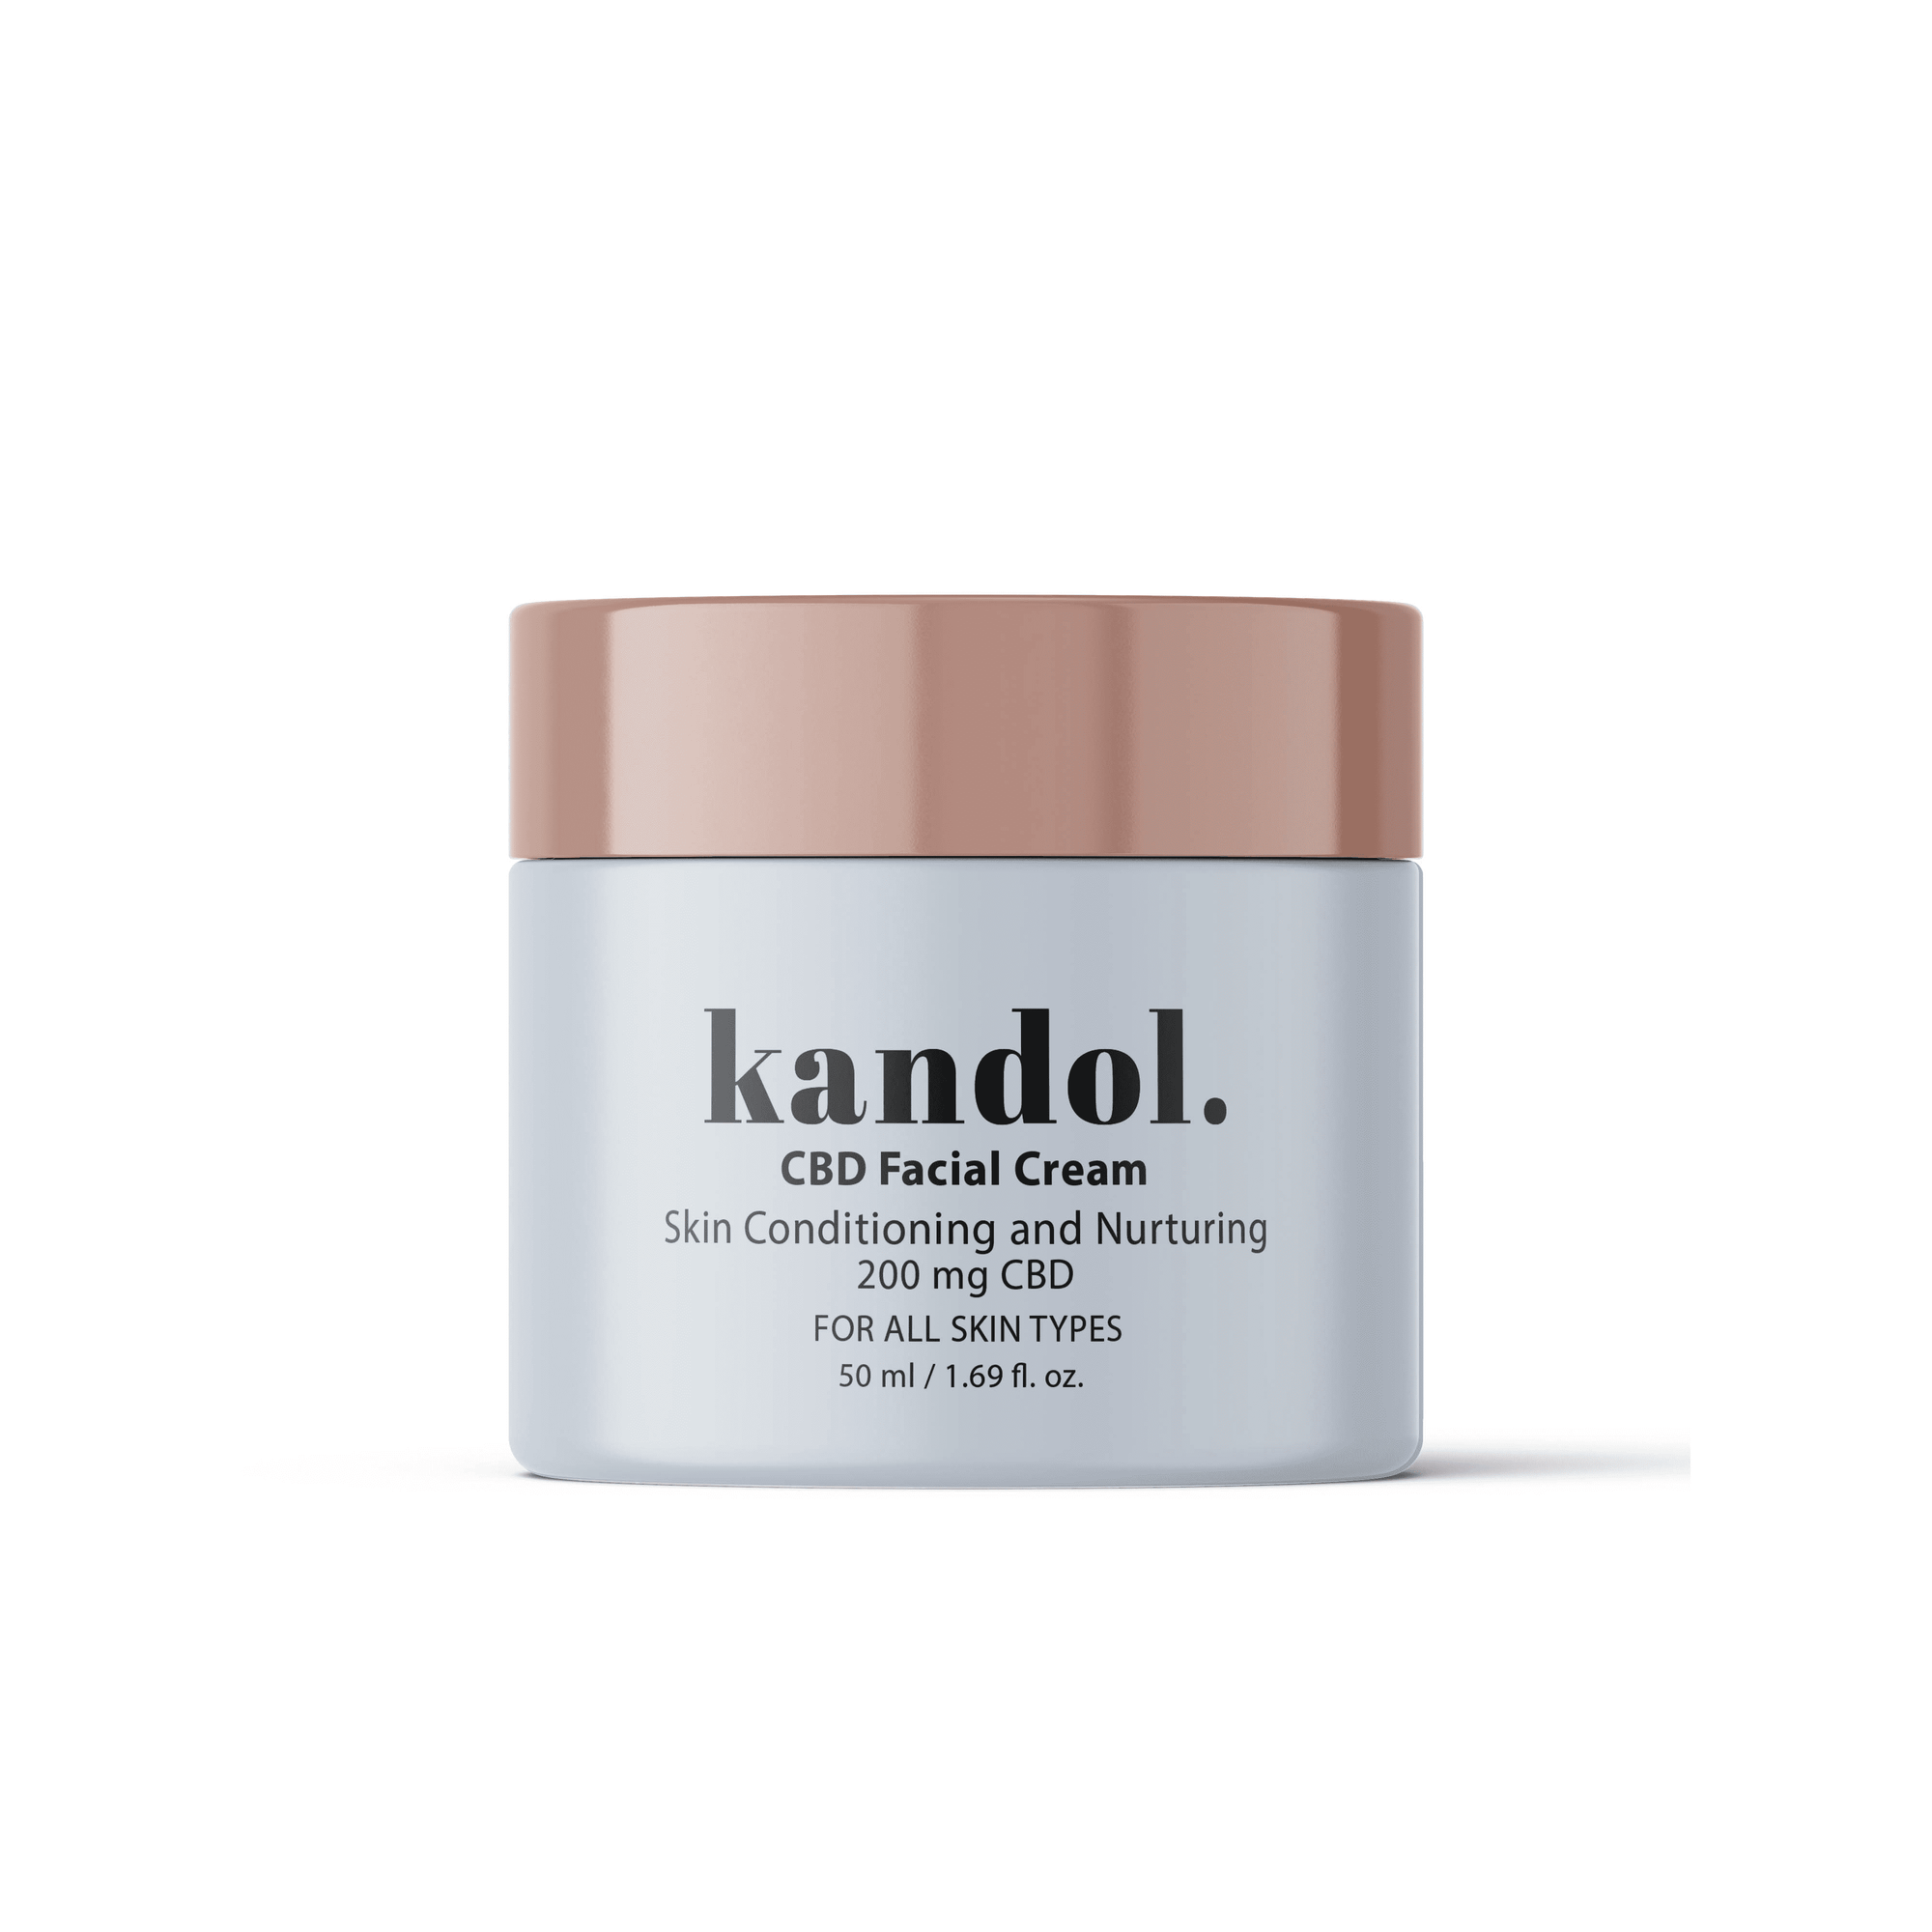 kandol. CBD Facial Cream. Skin Conditioning and Nurturing. One of the most effective facial creams for perfect results.